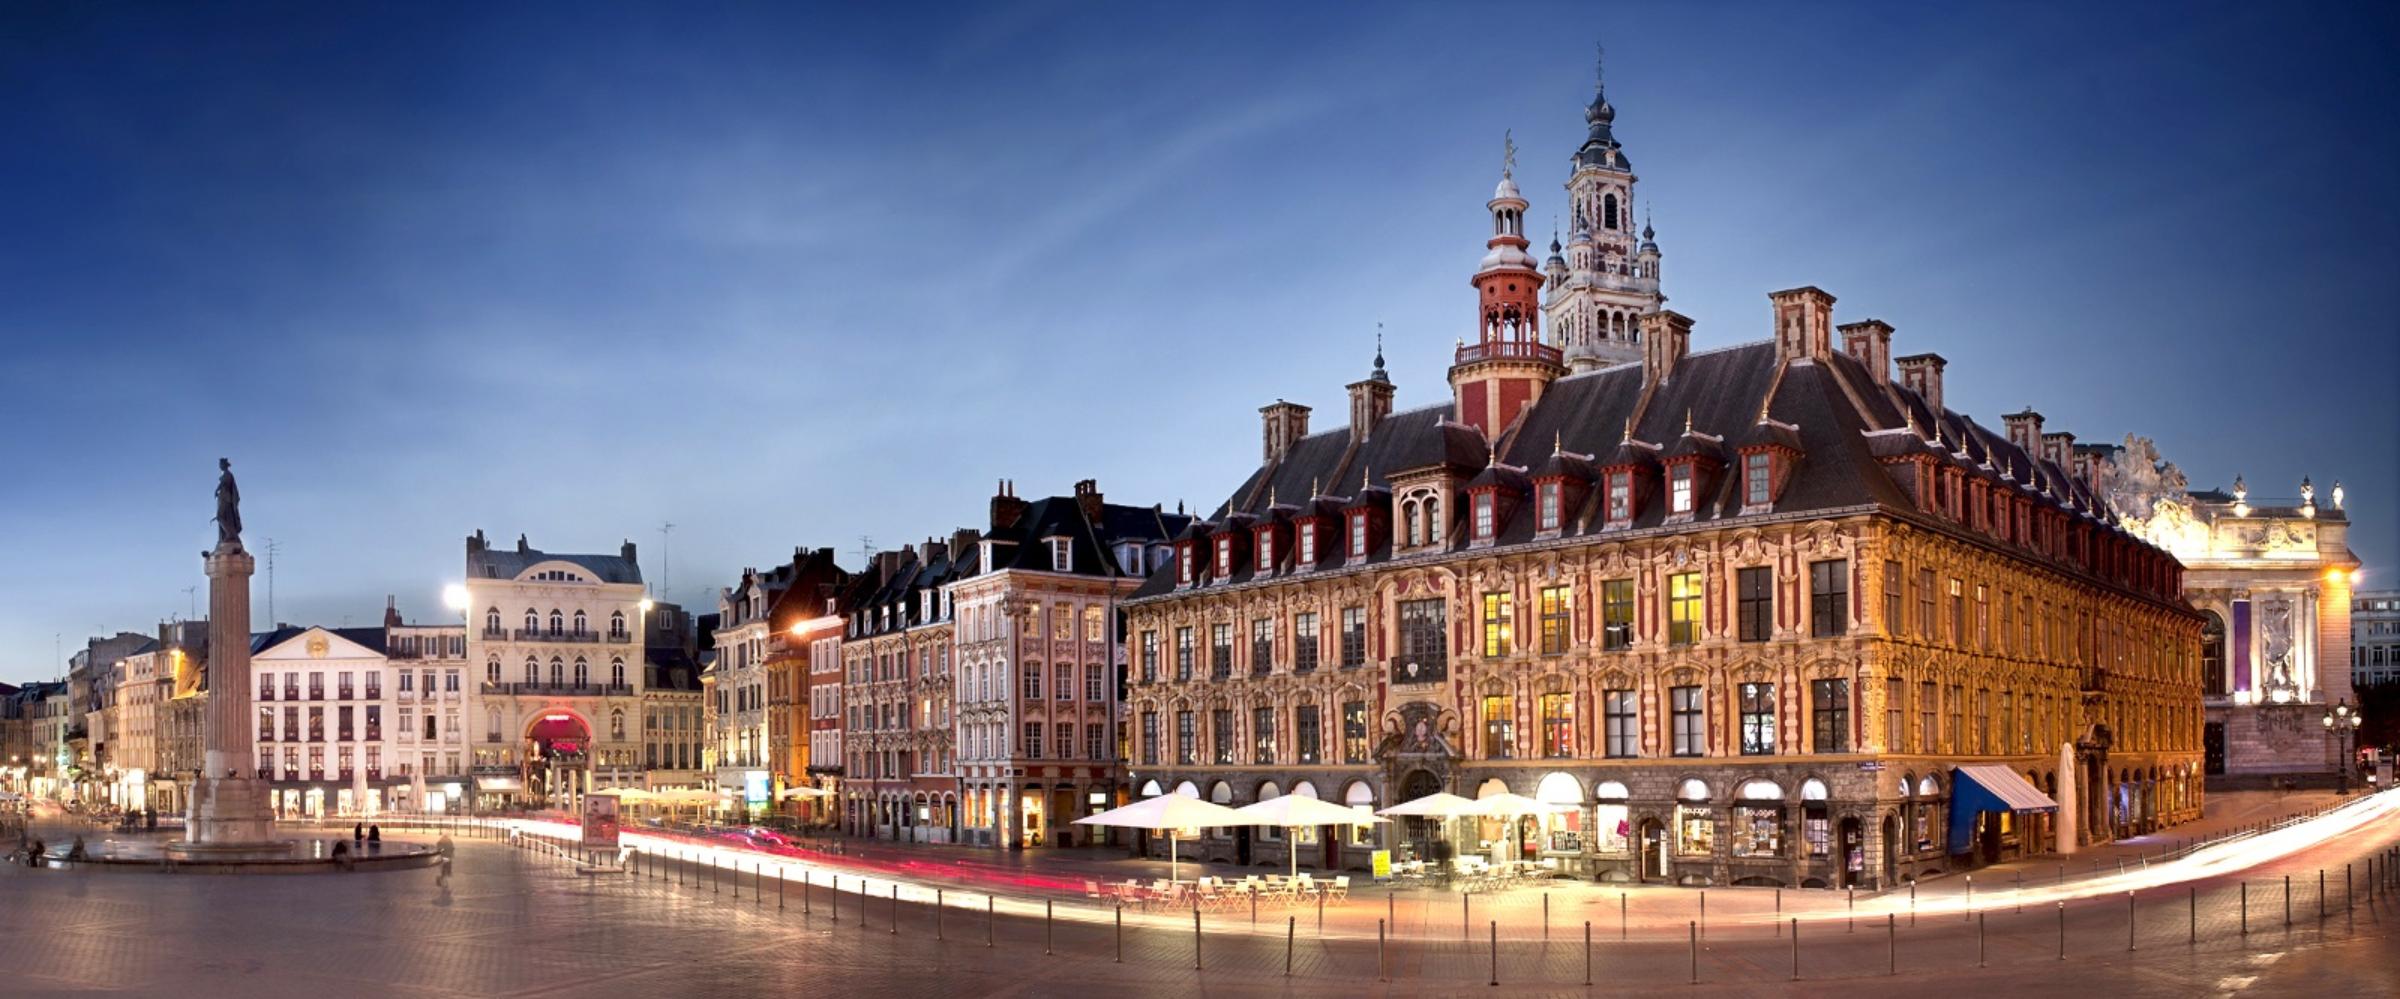 Lille old town guided walking tour